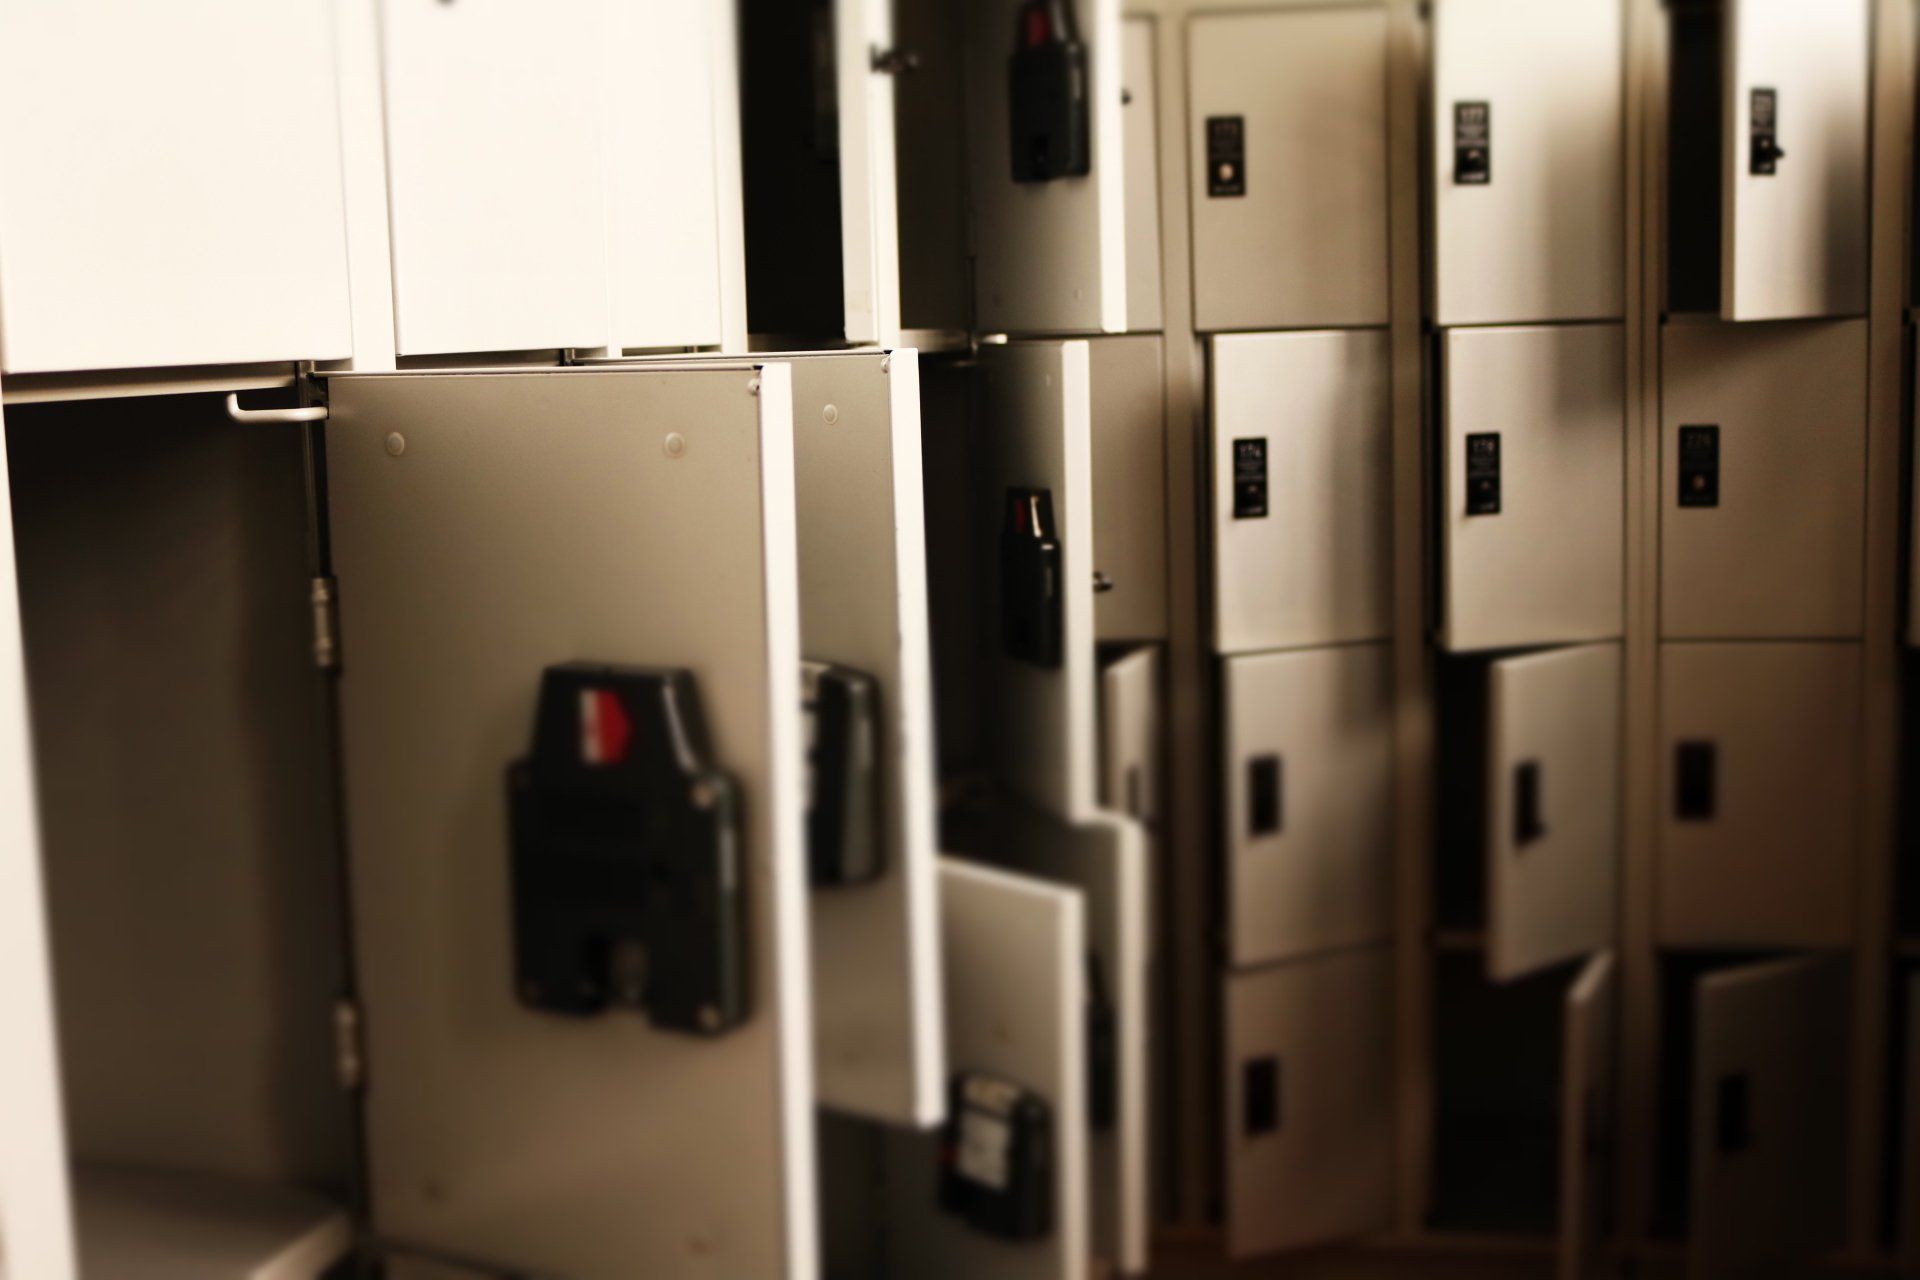 Rows of open and closed lockers